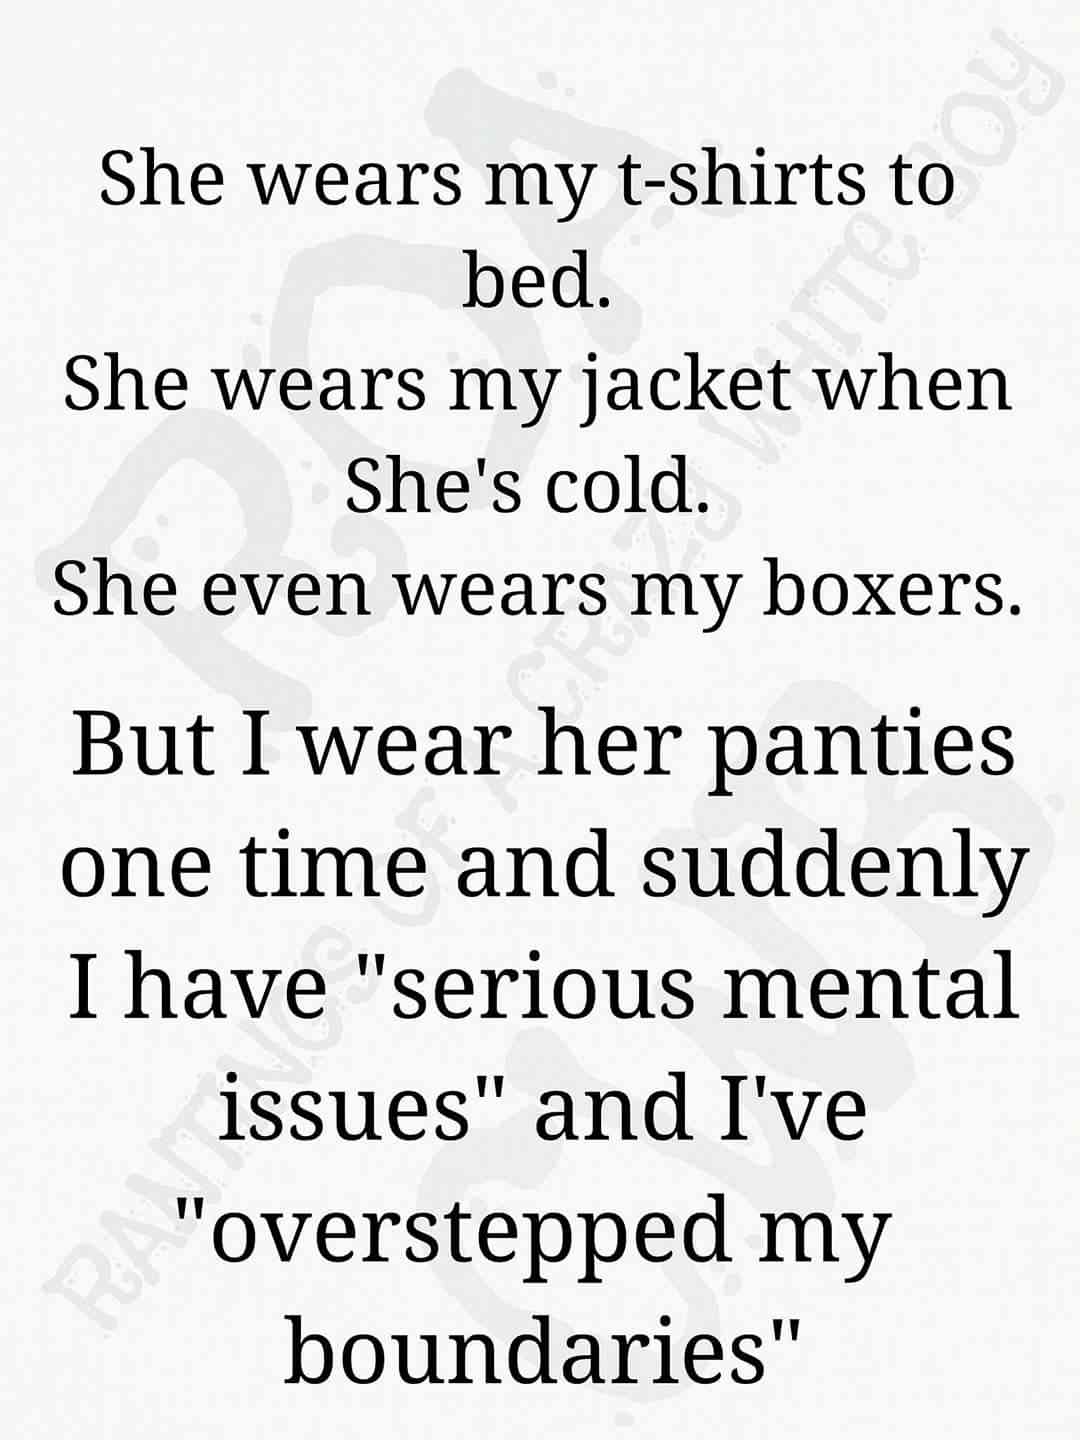 handwriting - She wears my tshirts to bed. She wears my jacket when She's cold. She even wears my boxers. But I wear her panties one time and suddenly I have "serious mental issues" and I've "overstepped my boundaries"